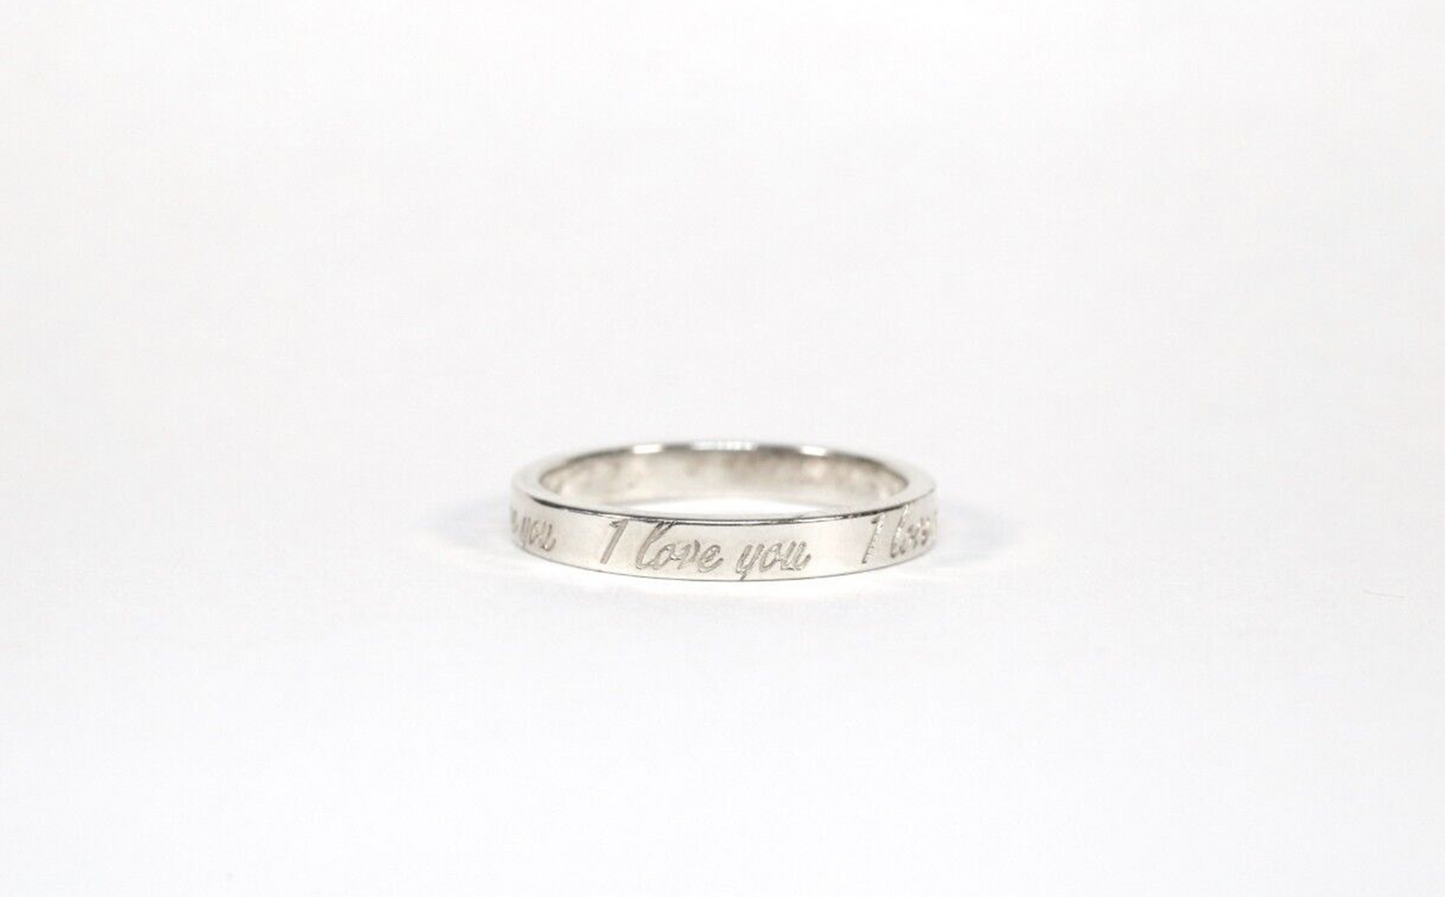 Tiffany & Co Sterling Silver "I Love You" Ring, Size 6.25 - 2.3g